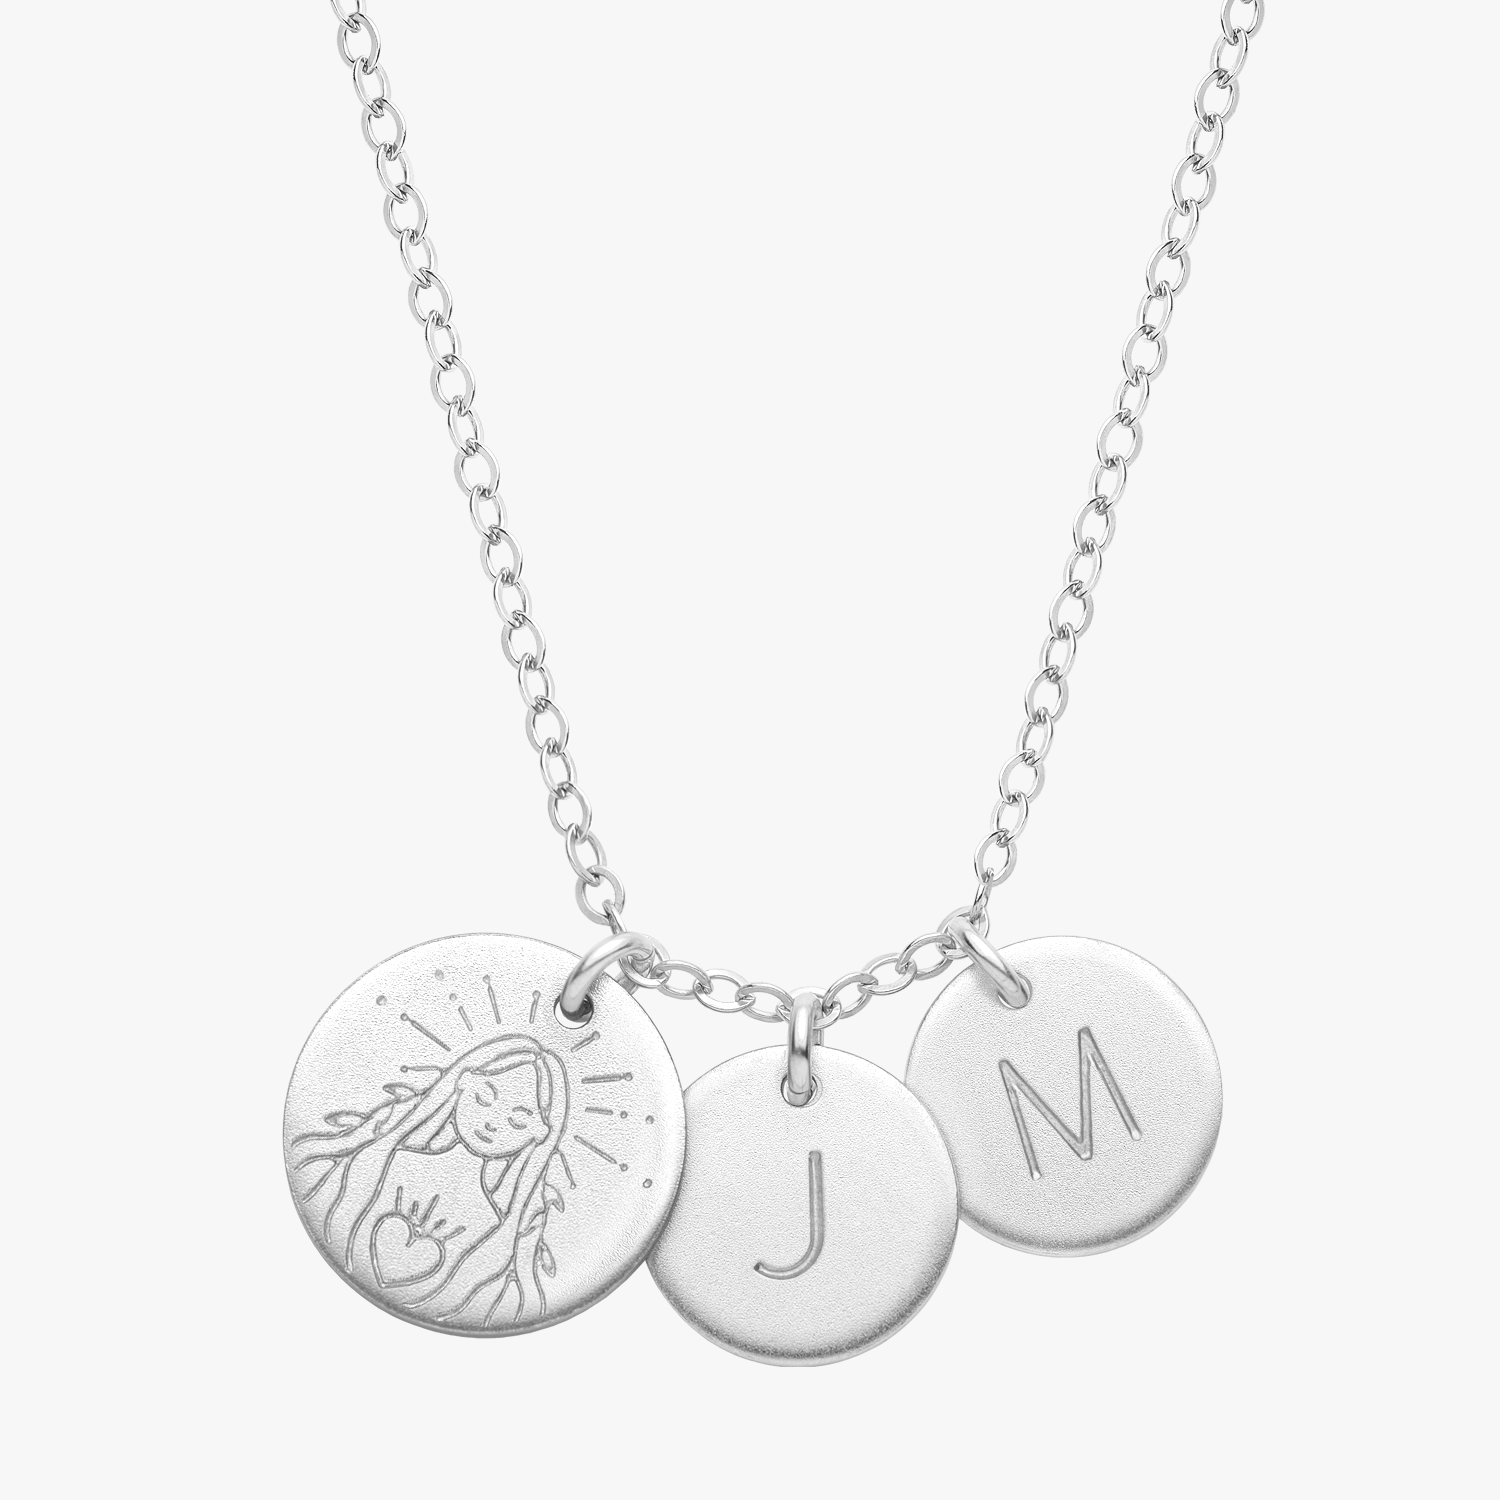 Personalized Empowerment Silver Necklace